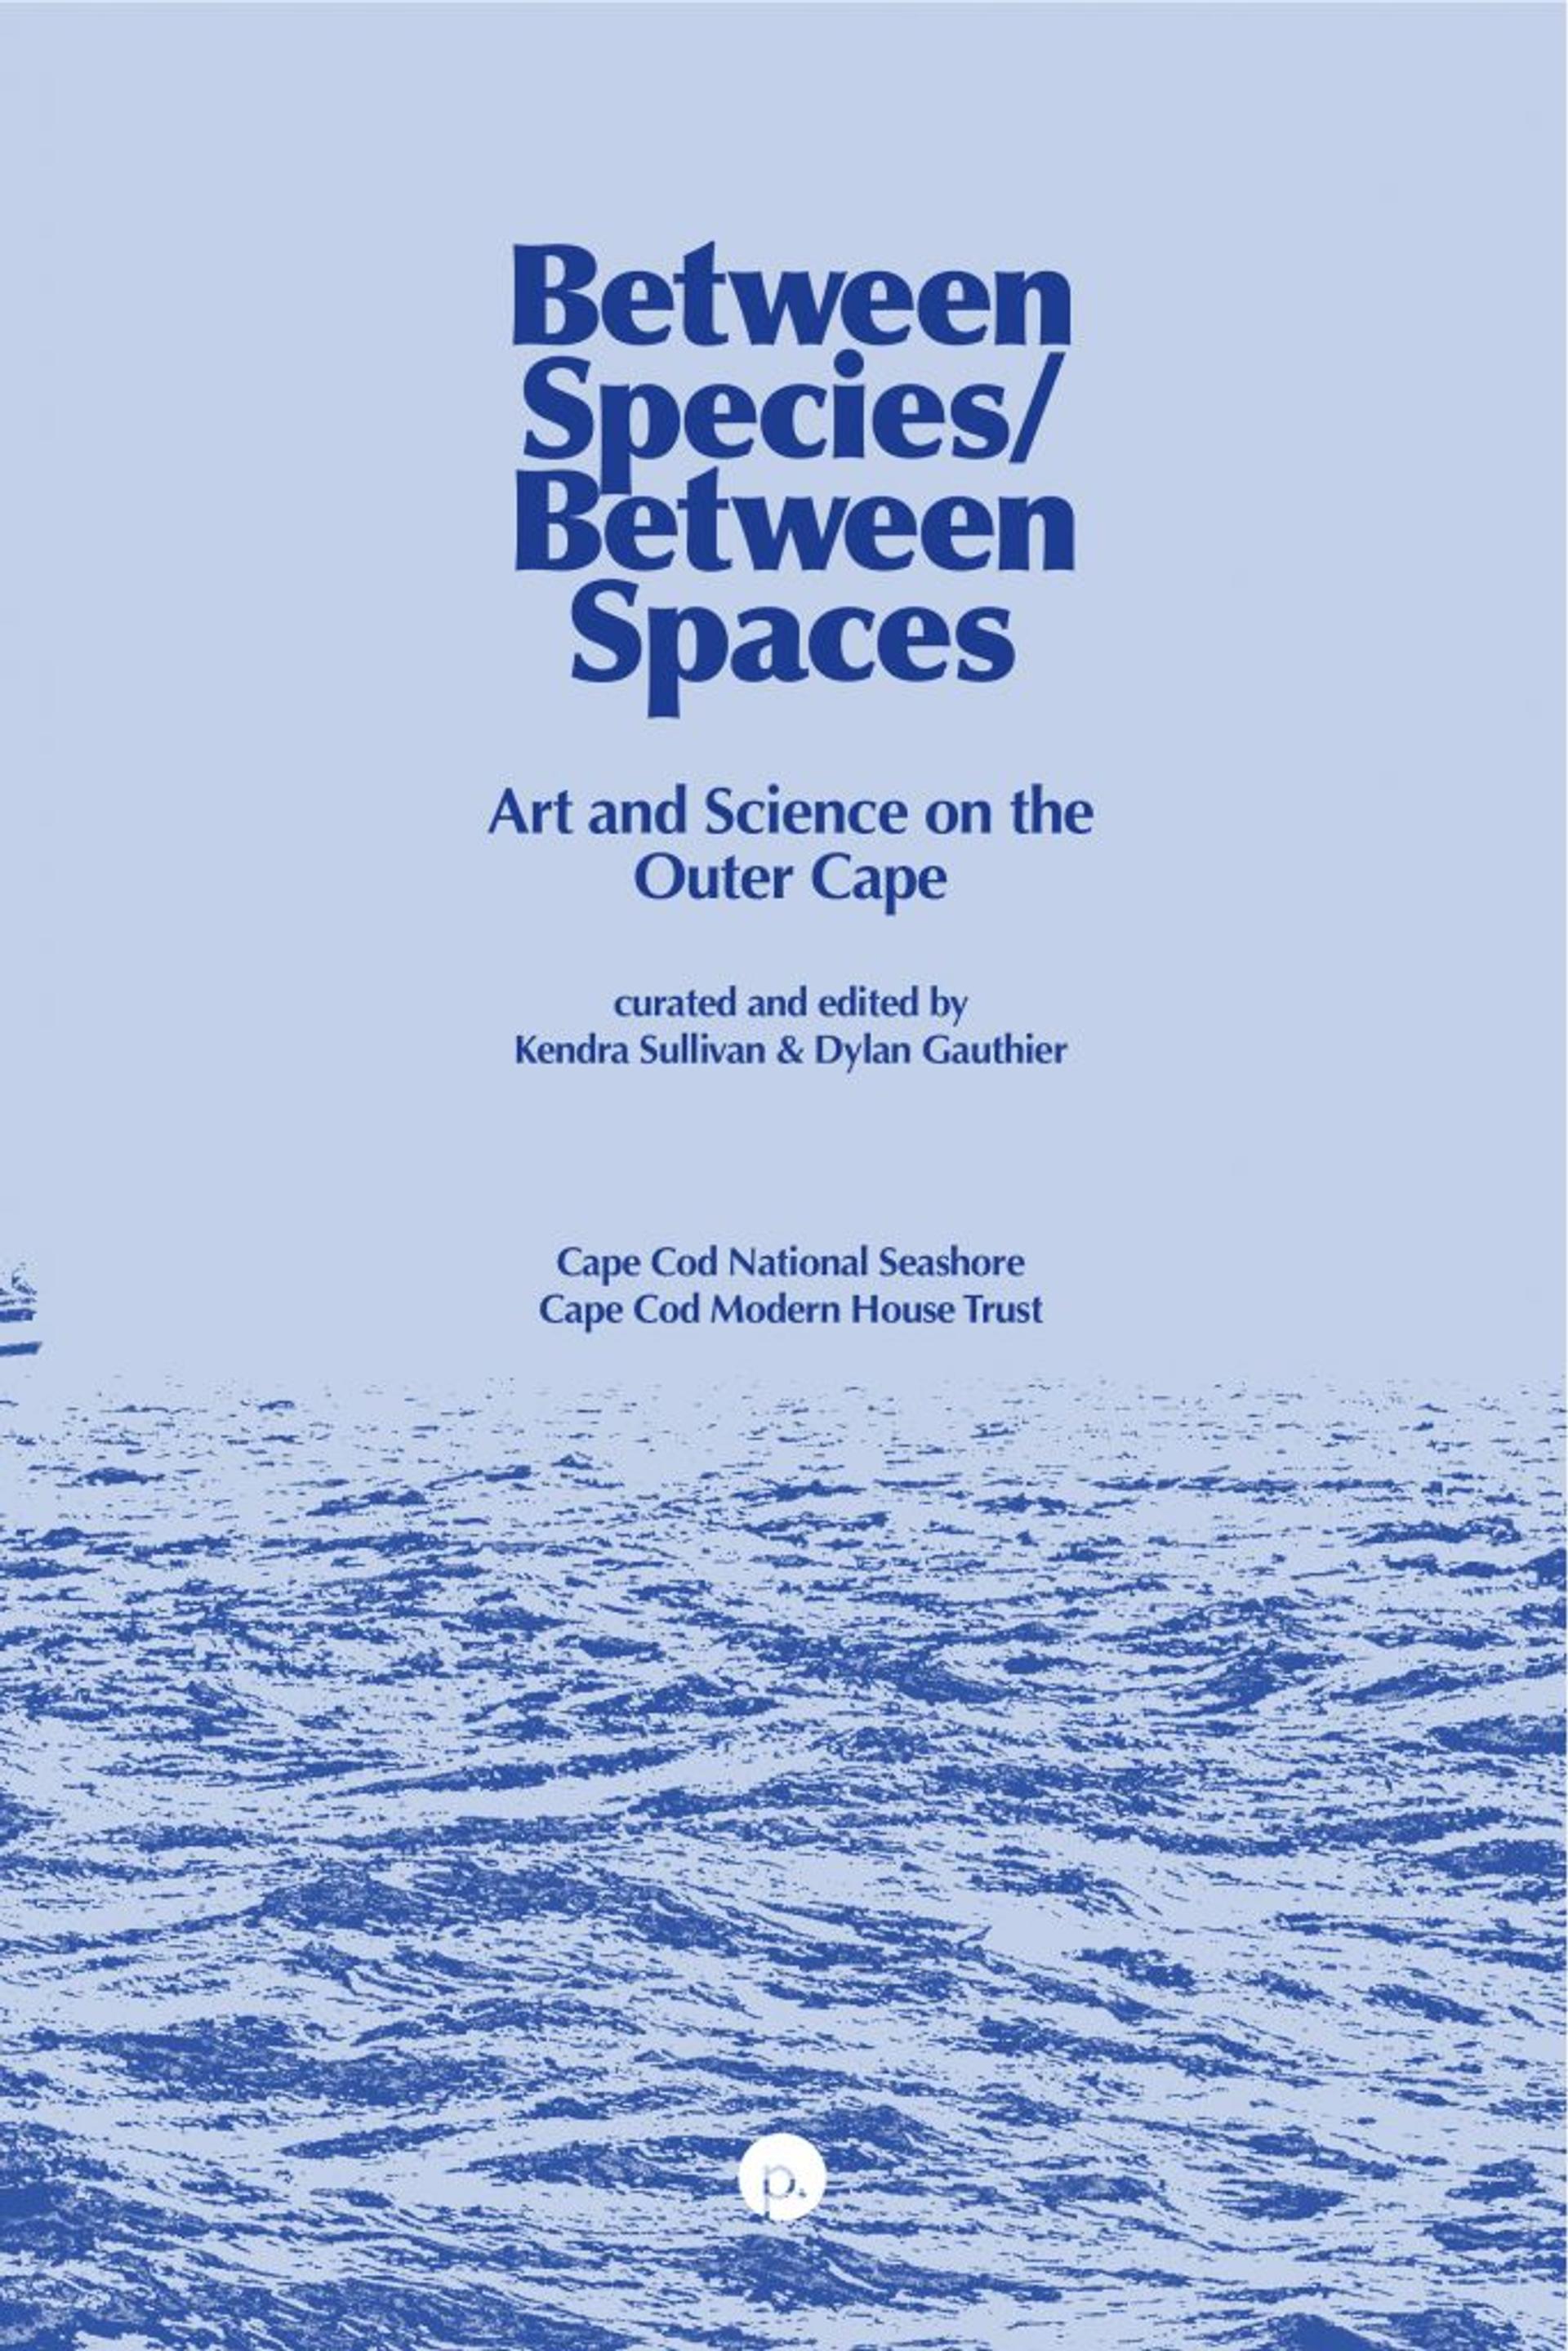 Cover of book titled Between Species/Between Spaces: Art and Science on the Outer Cape